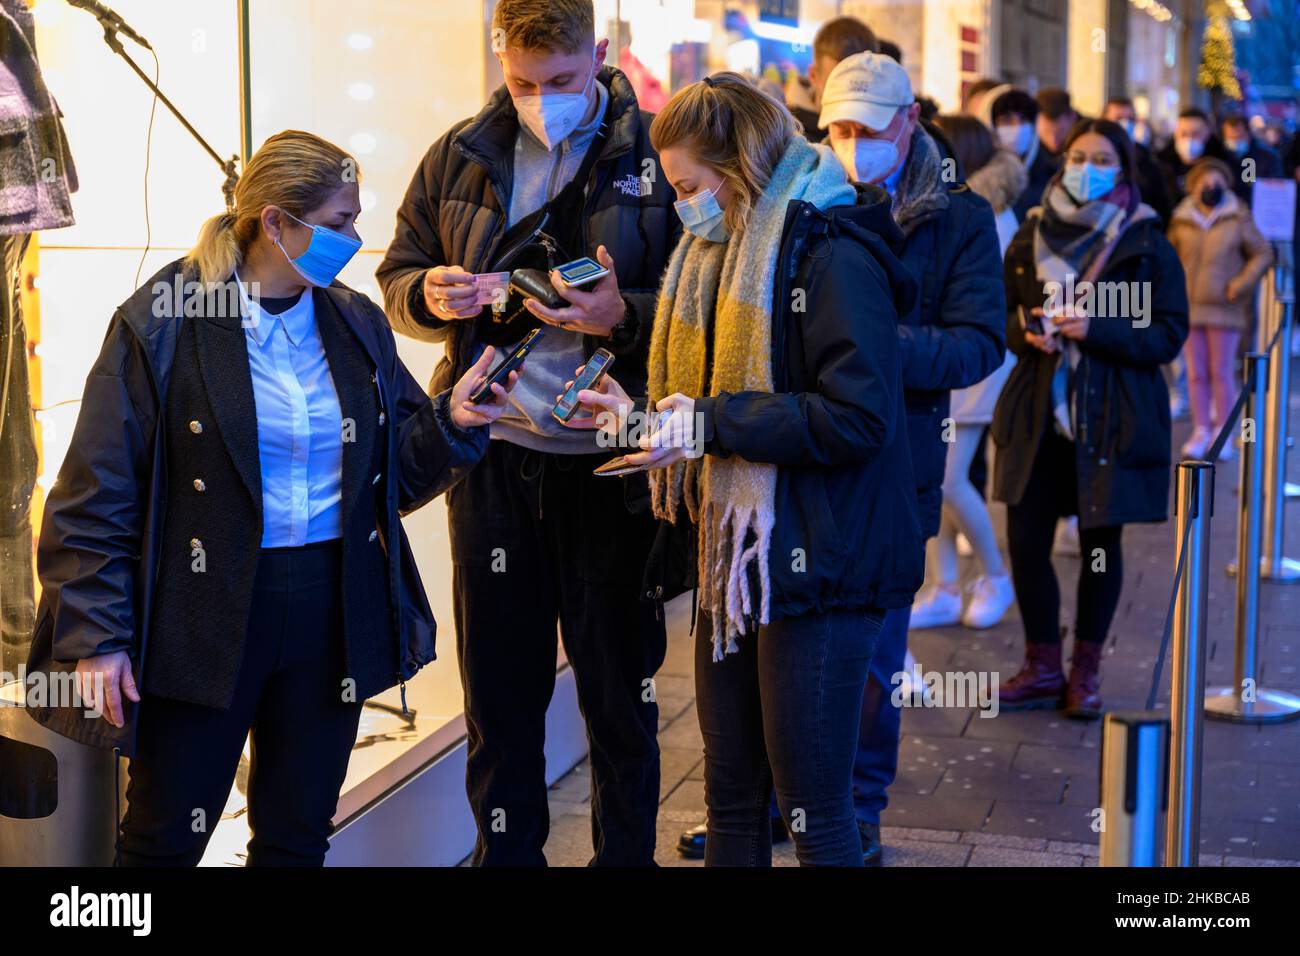 Vaccination passports are checked at the entrance to a fashion boutique in the city centre of Düsseldorf, NRW, Germany on 11.12.2021 Stock Photo